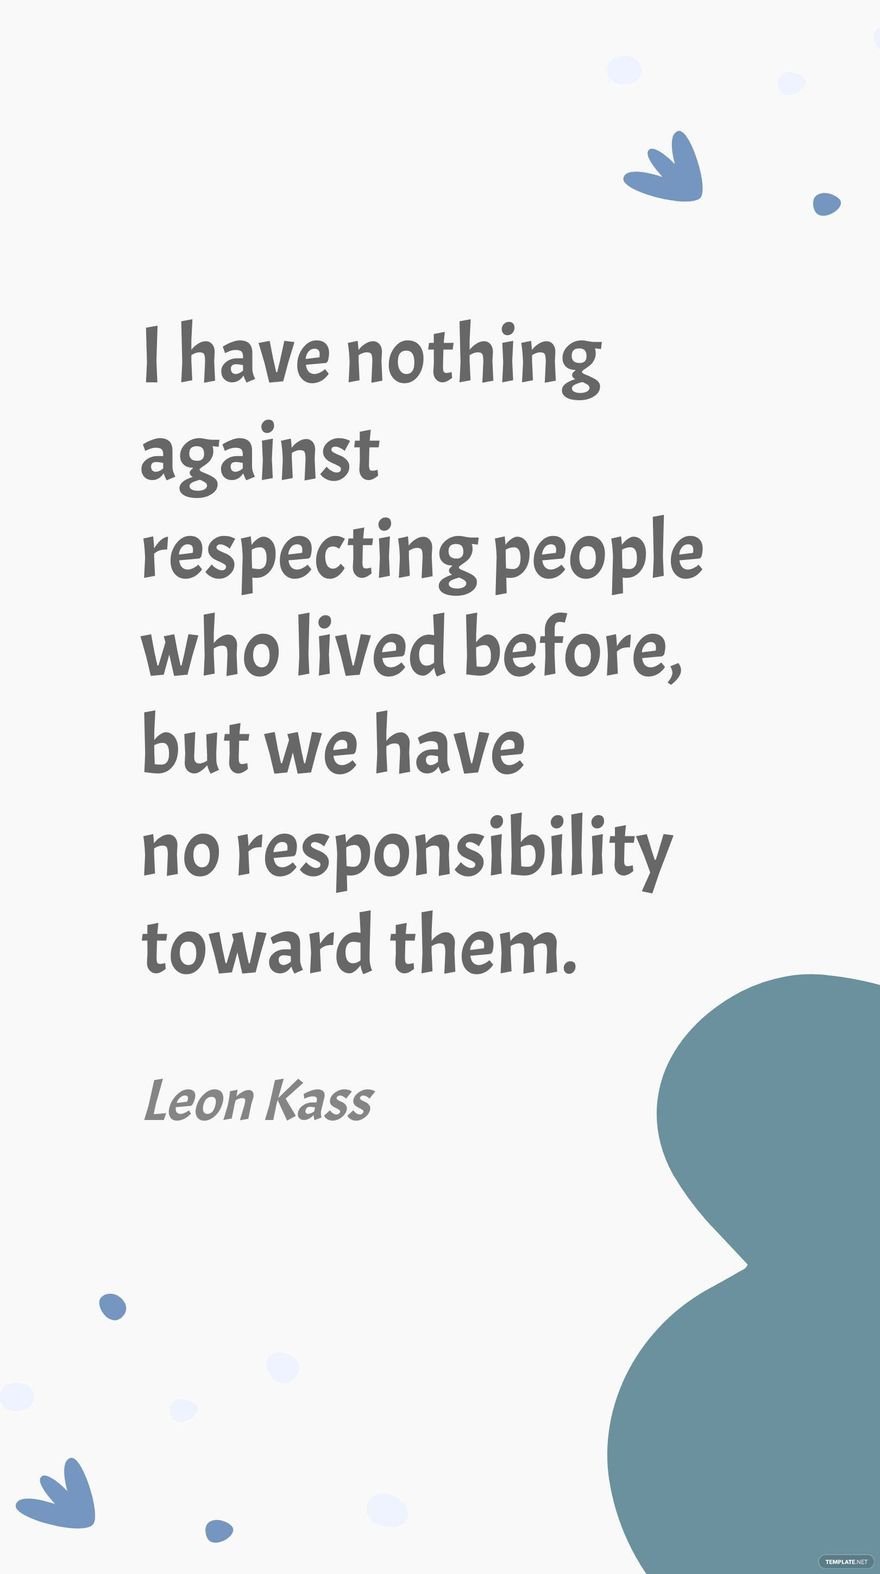 Leon Kass- I have nothing against respecting people who lived before, but we have no responsibility toward them.